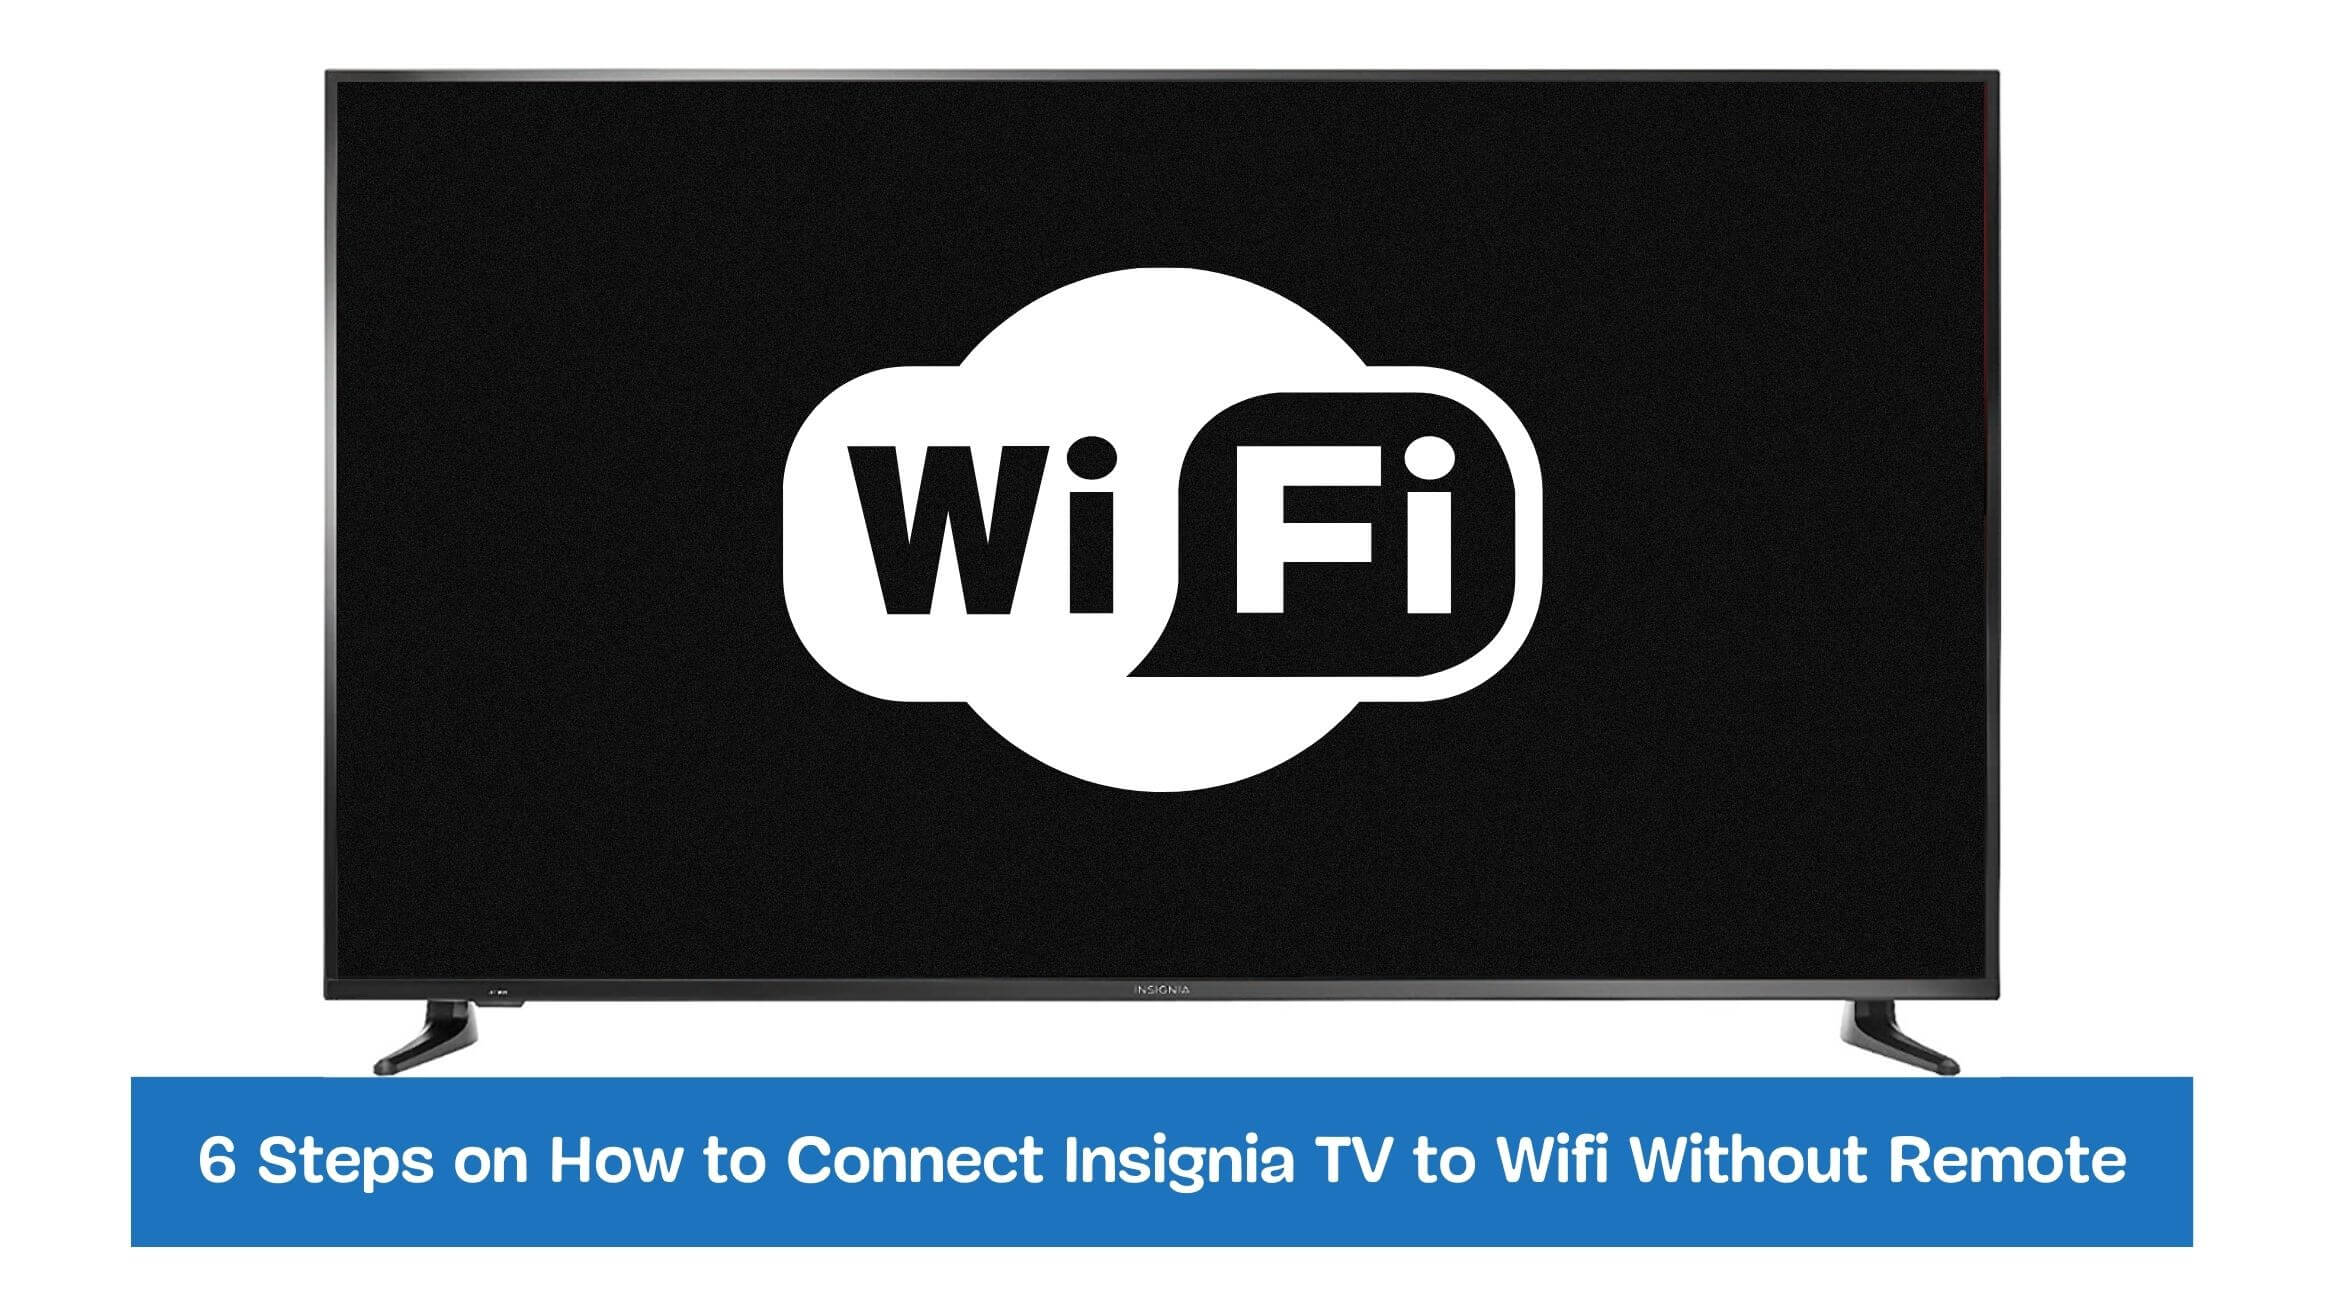 6 Steps on How to Connect Insignia TV to Wifi Without Remote